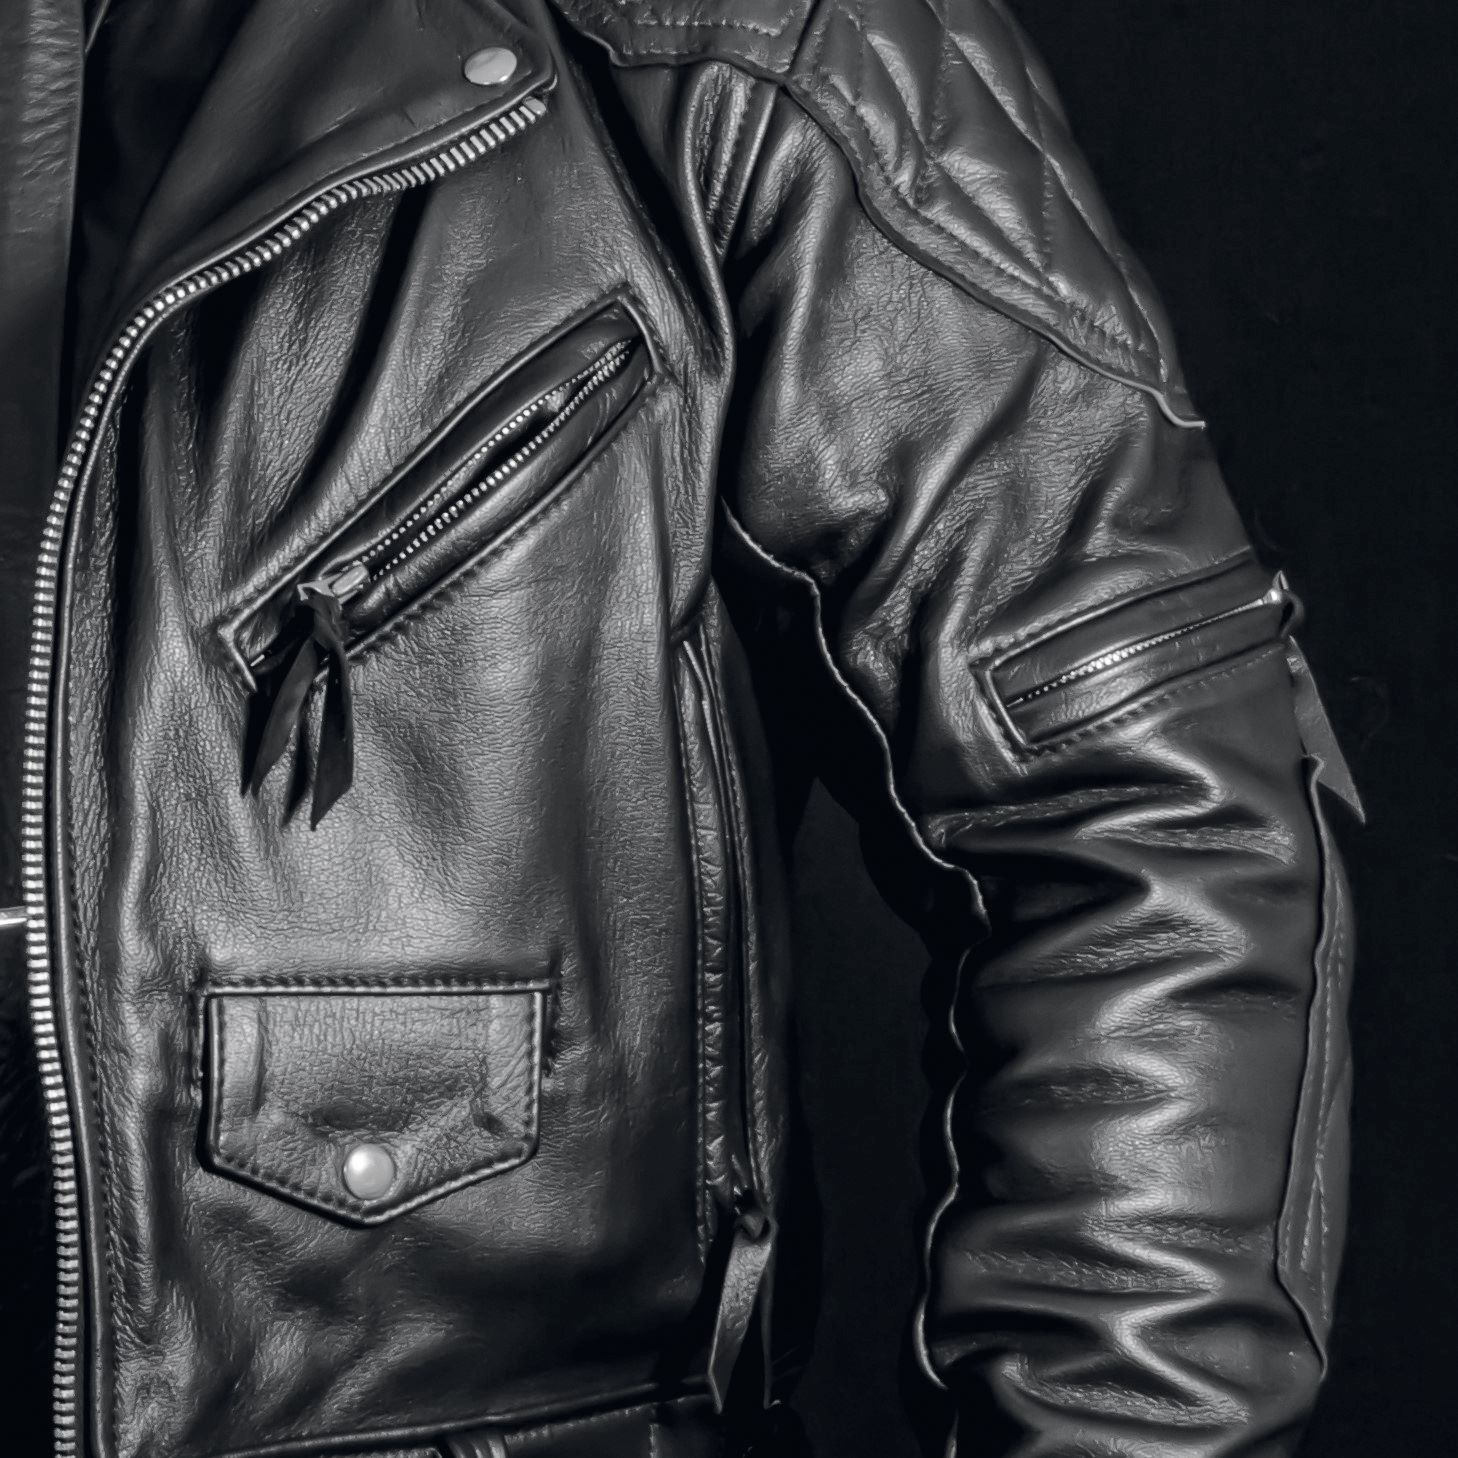 Drummer Mag Closeup Pic Of Leather Jacket